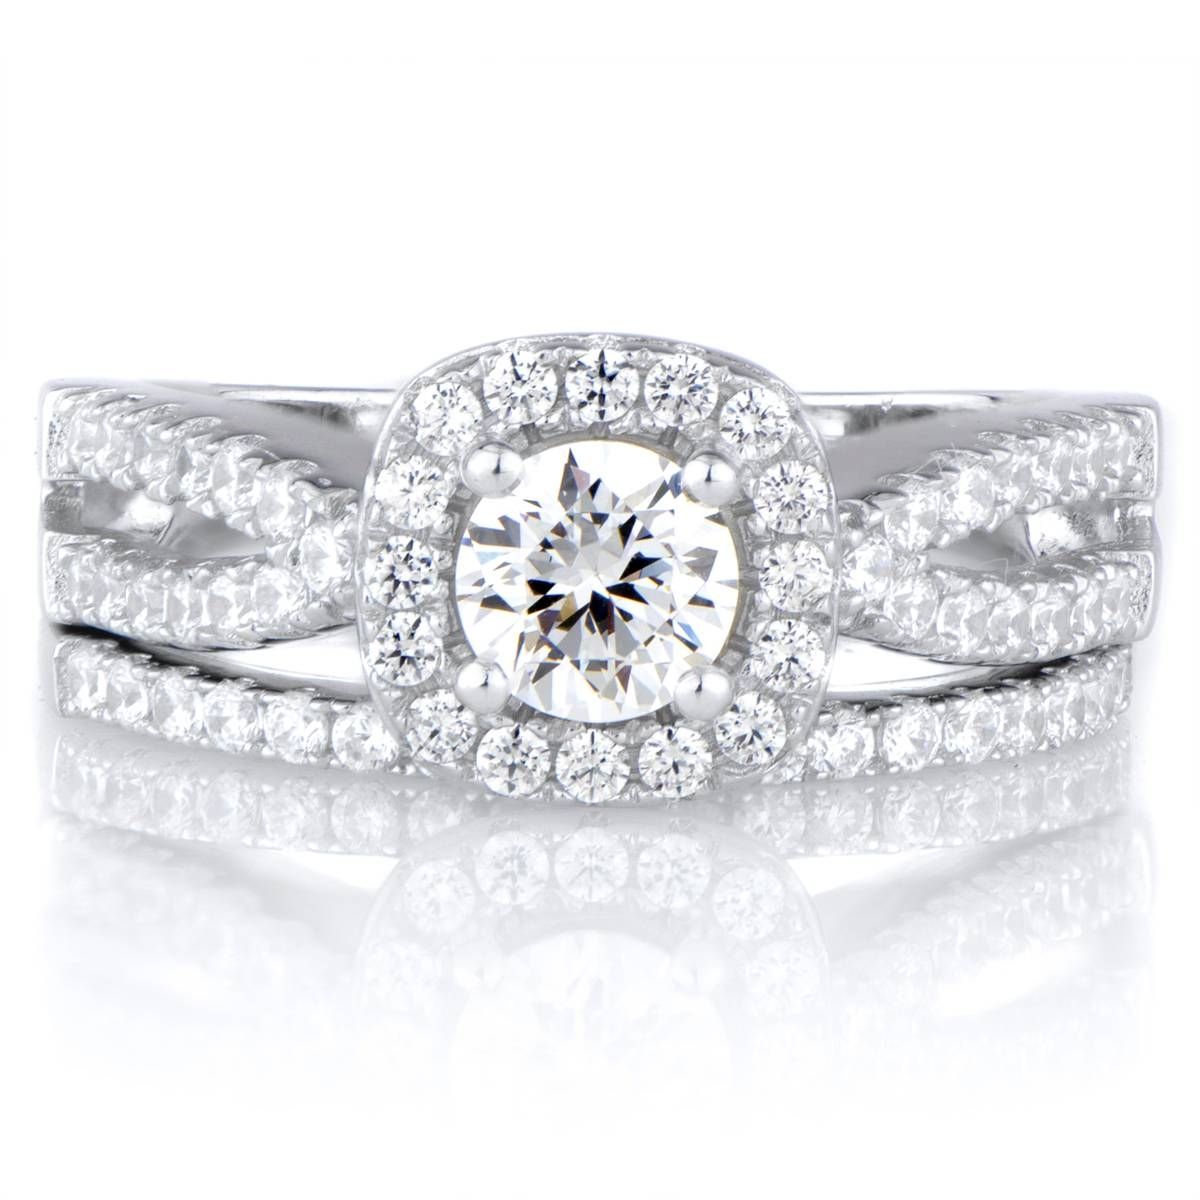 Damini's Round Cut Split Band Cz Wedding Ring Set Throughout Silver Engagement Ring Sets (View 2 of 15)